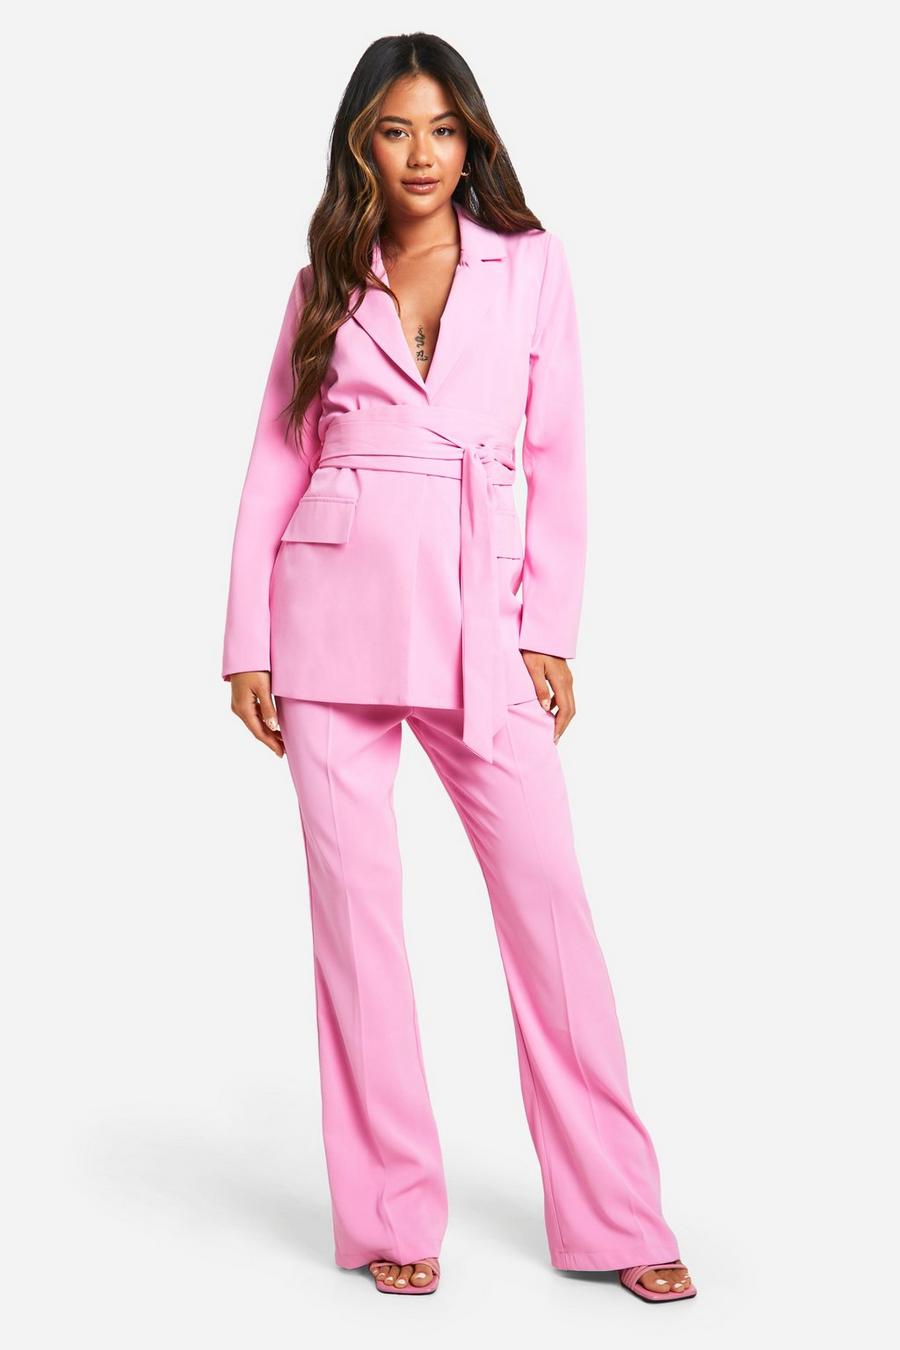 Candy pink Fit & Flare Dress Pants